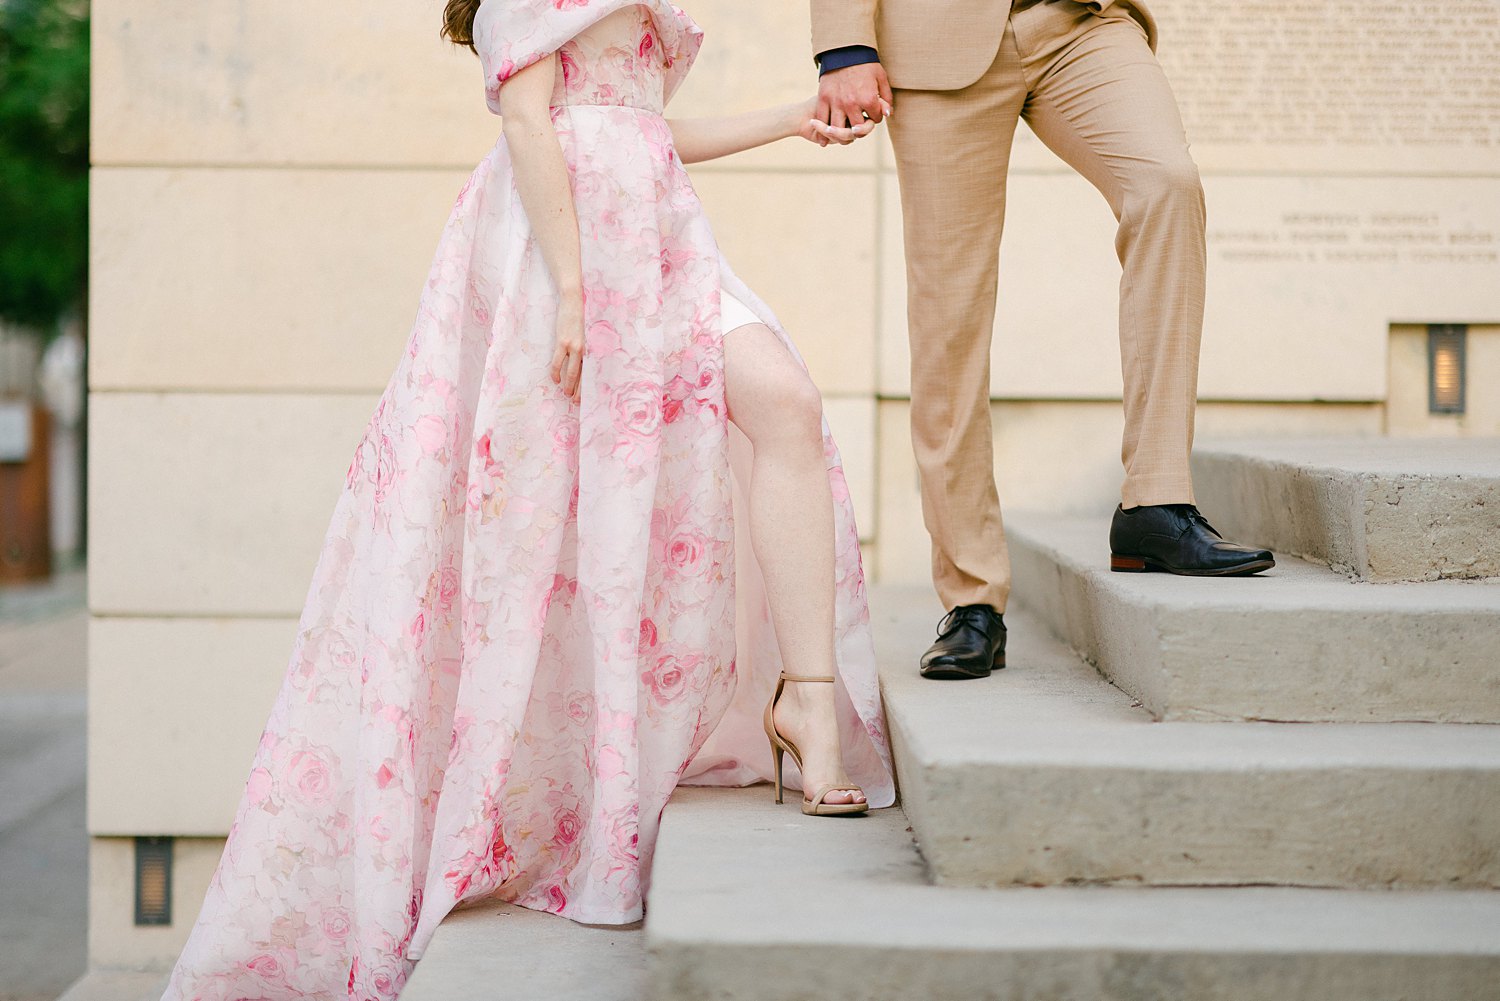 woman in Pink floral gown walking up stairs with man in tan suit